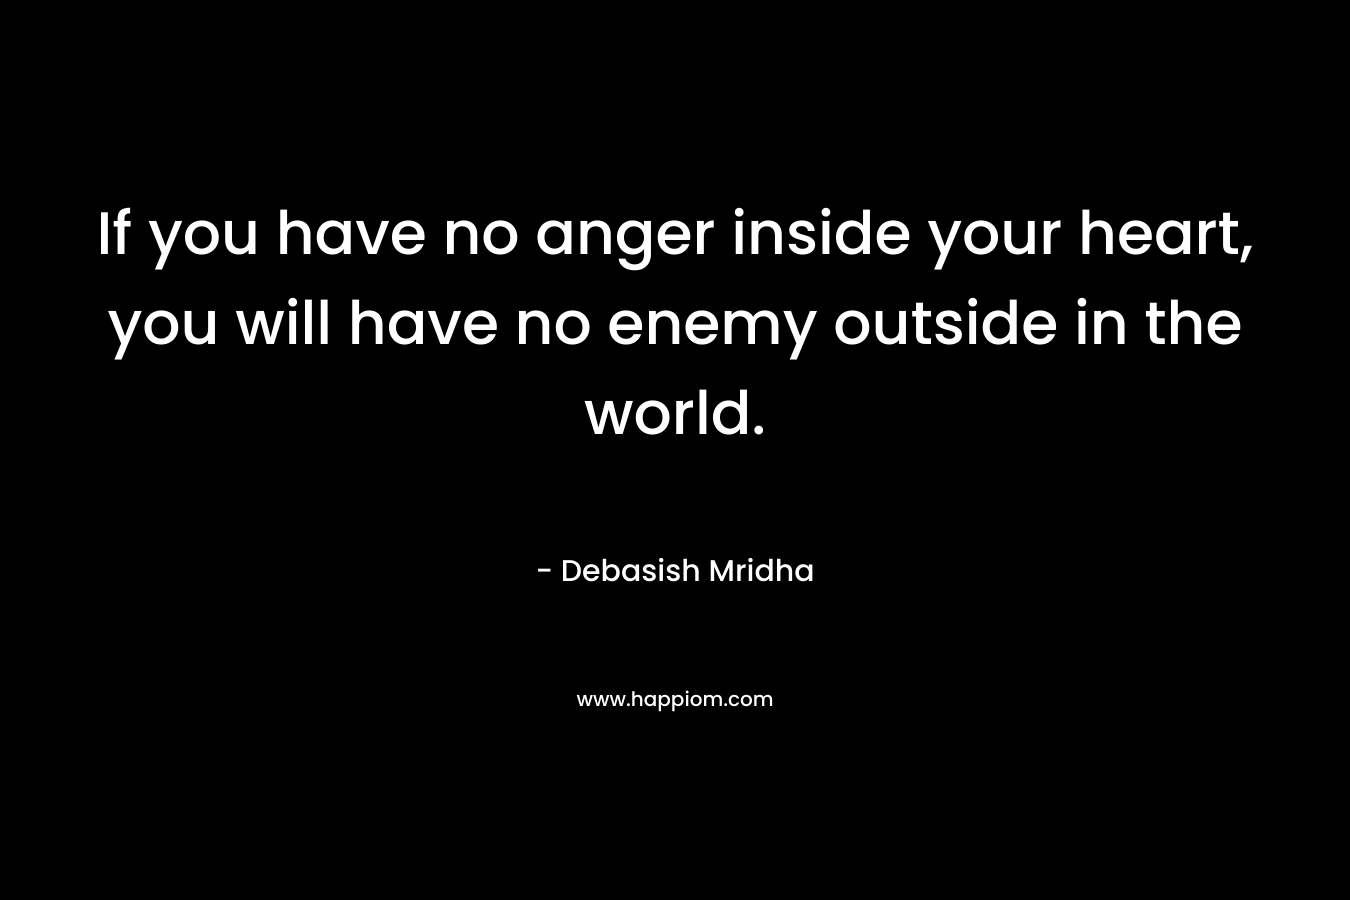 If you have no anger inside your heart, you will have no enemy outside in the world.